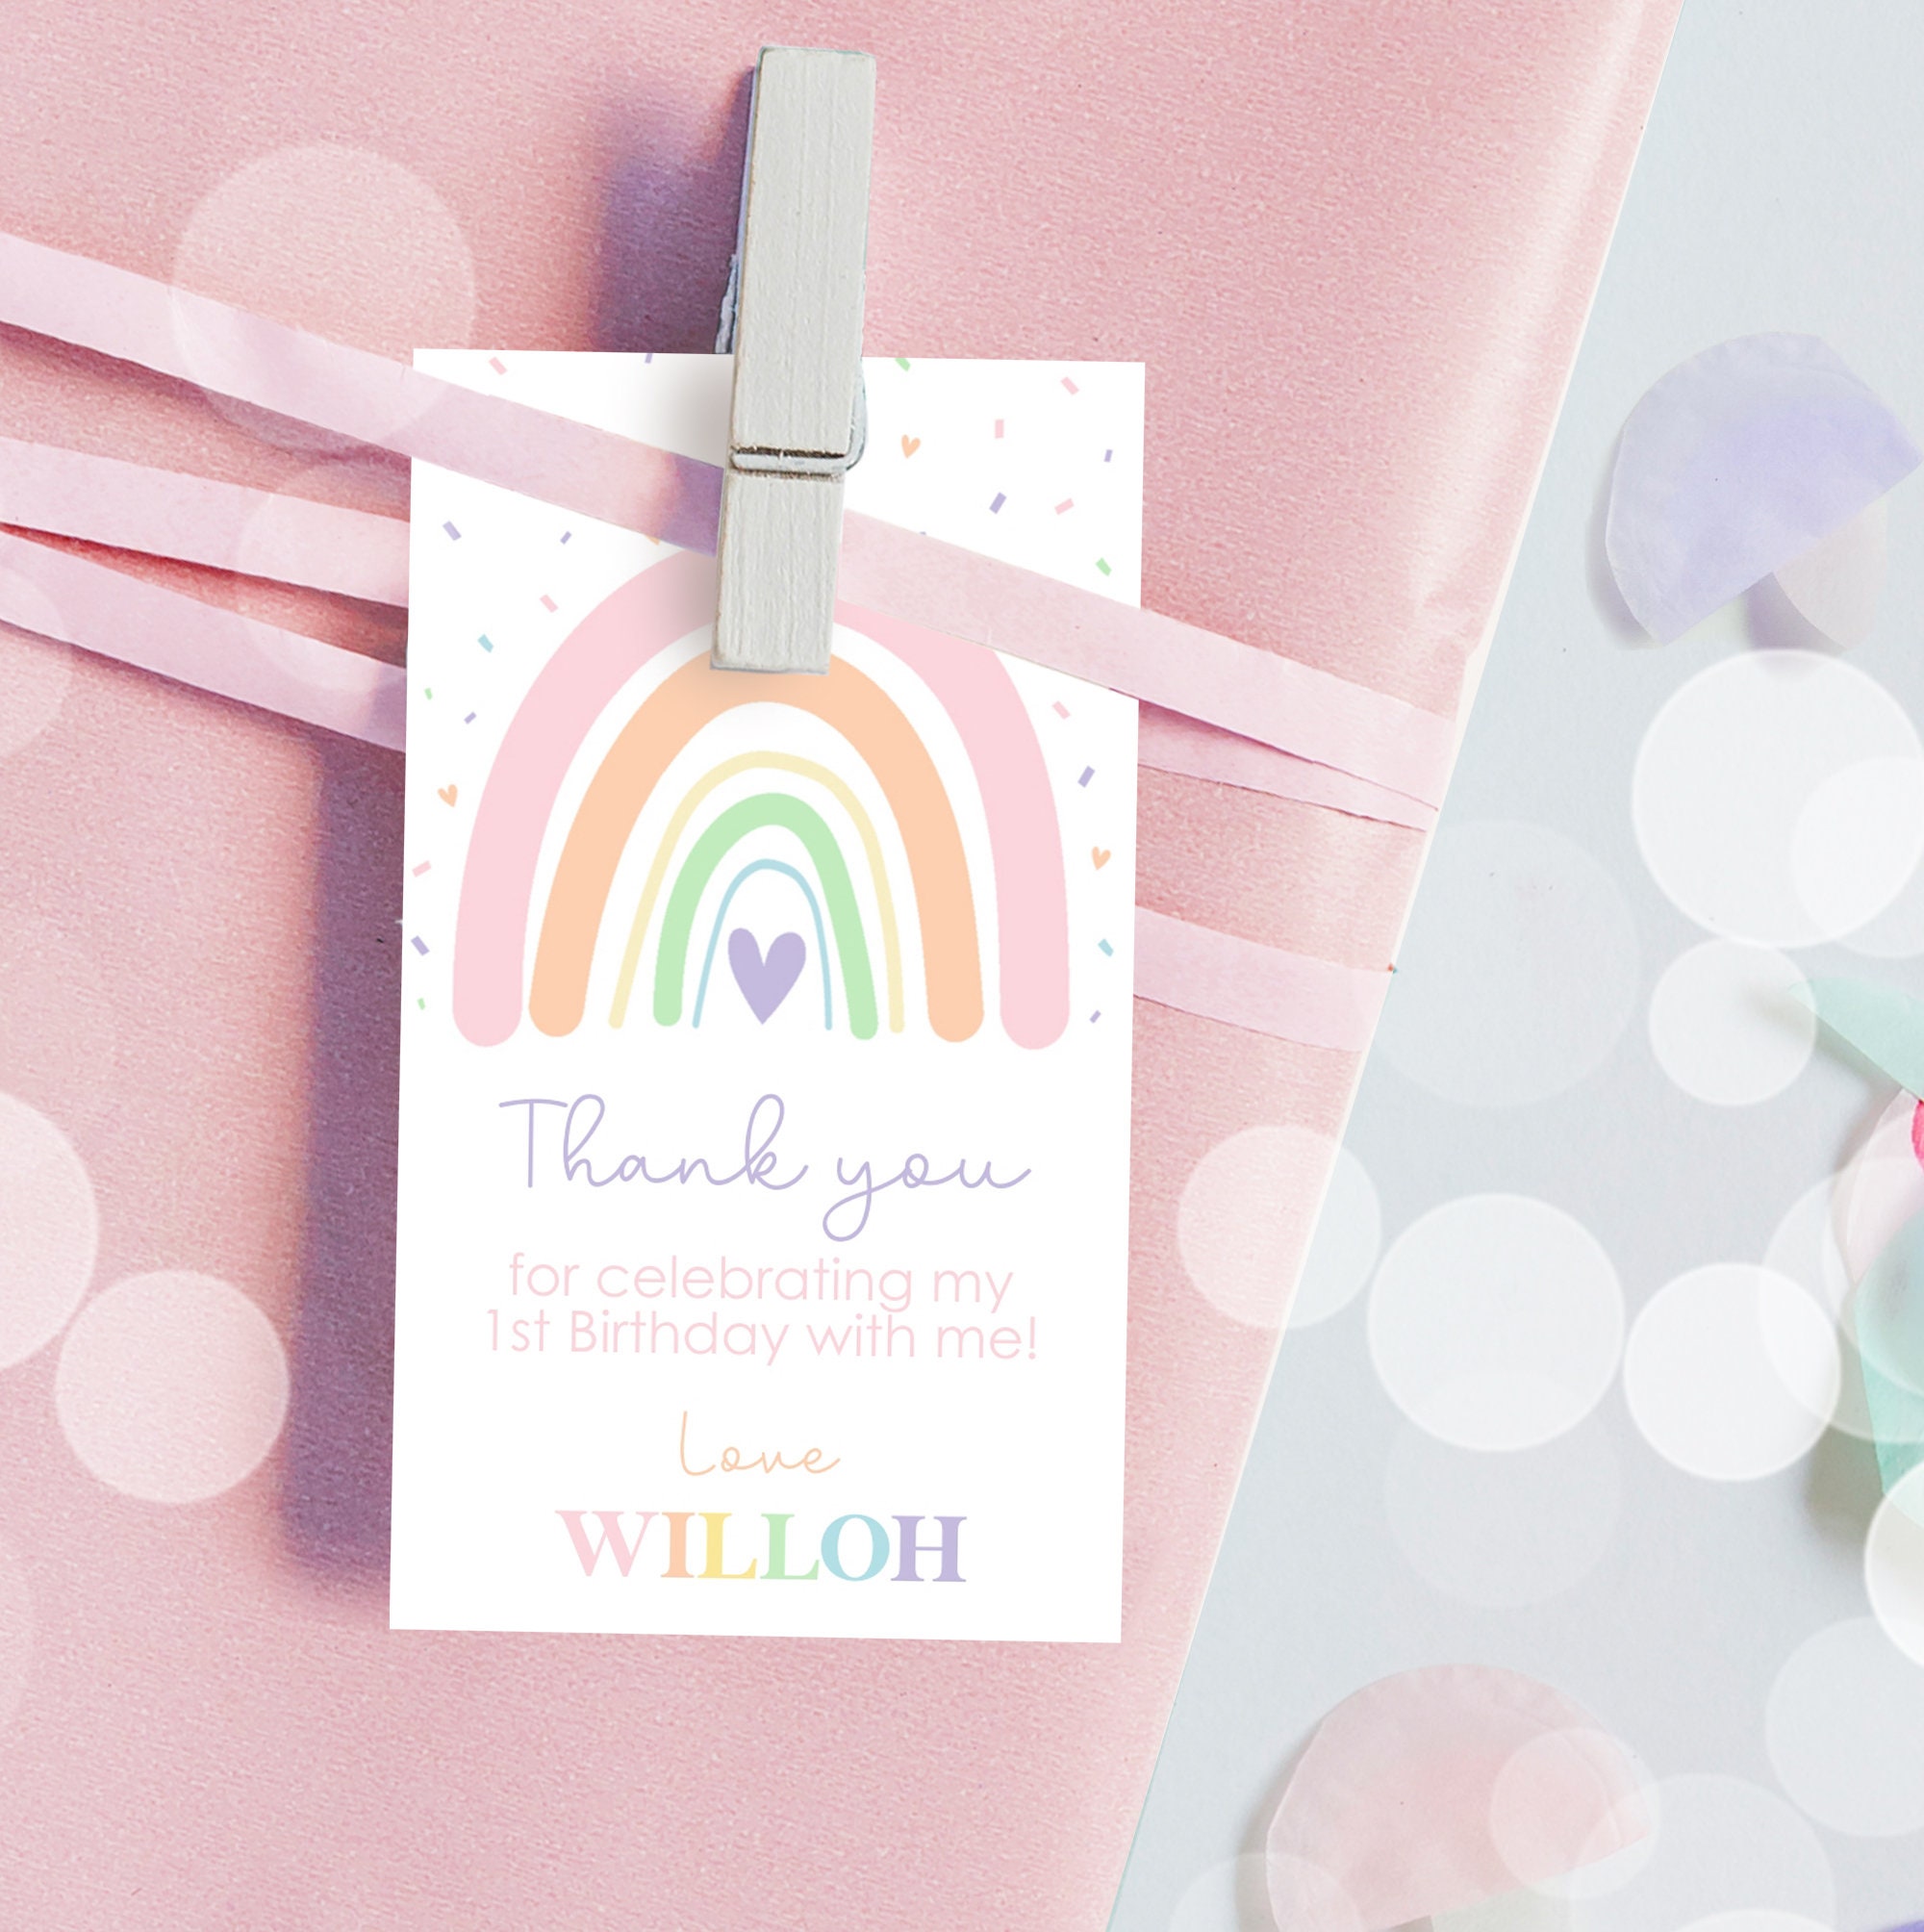 Fancy Frame Kids Party Favor Thank You Tags with String, 40-Pack Floral Rainbow Birthday Gift Tags for Gift Bags, Favor Bags, Goody Bags, Girls Boho B